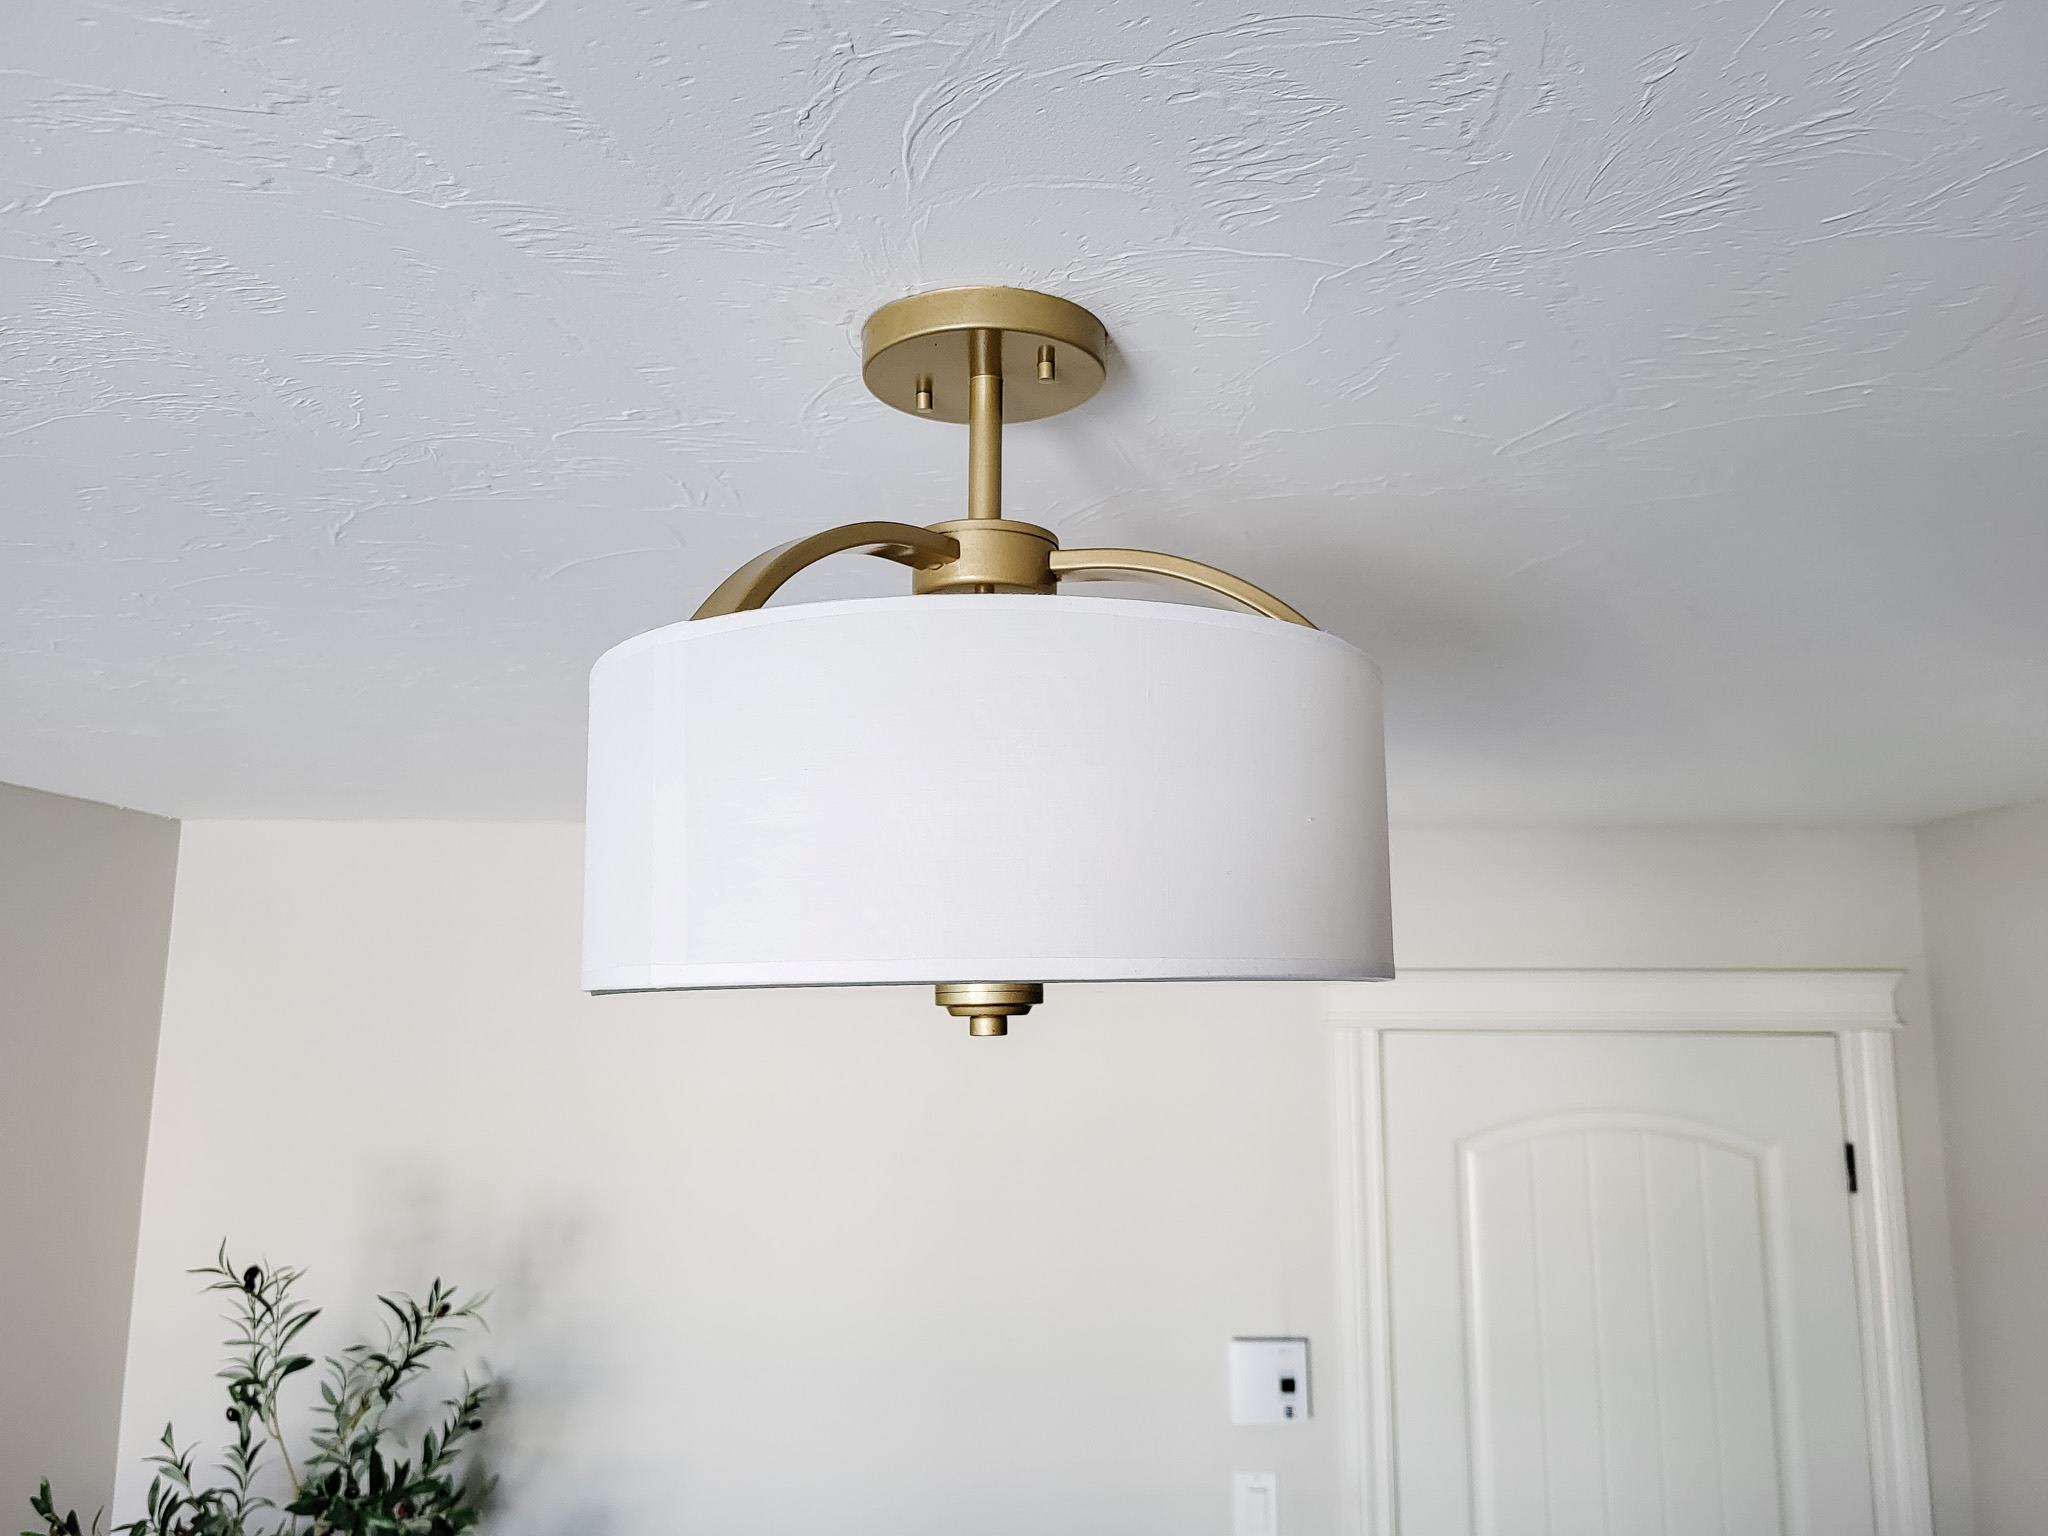 How to Paint a Light Fixture in 5 Easy Steps